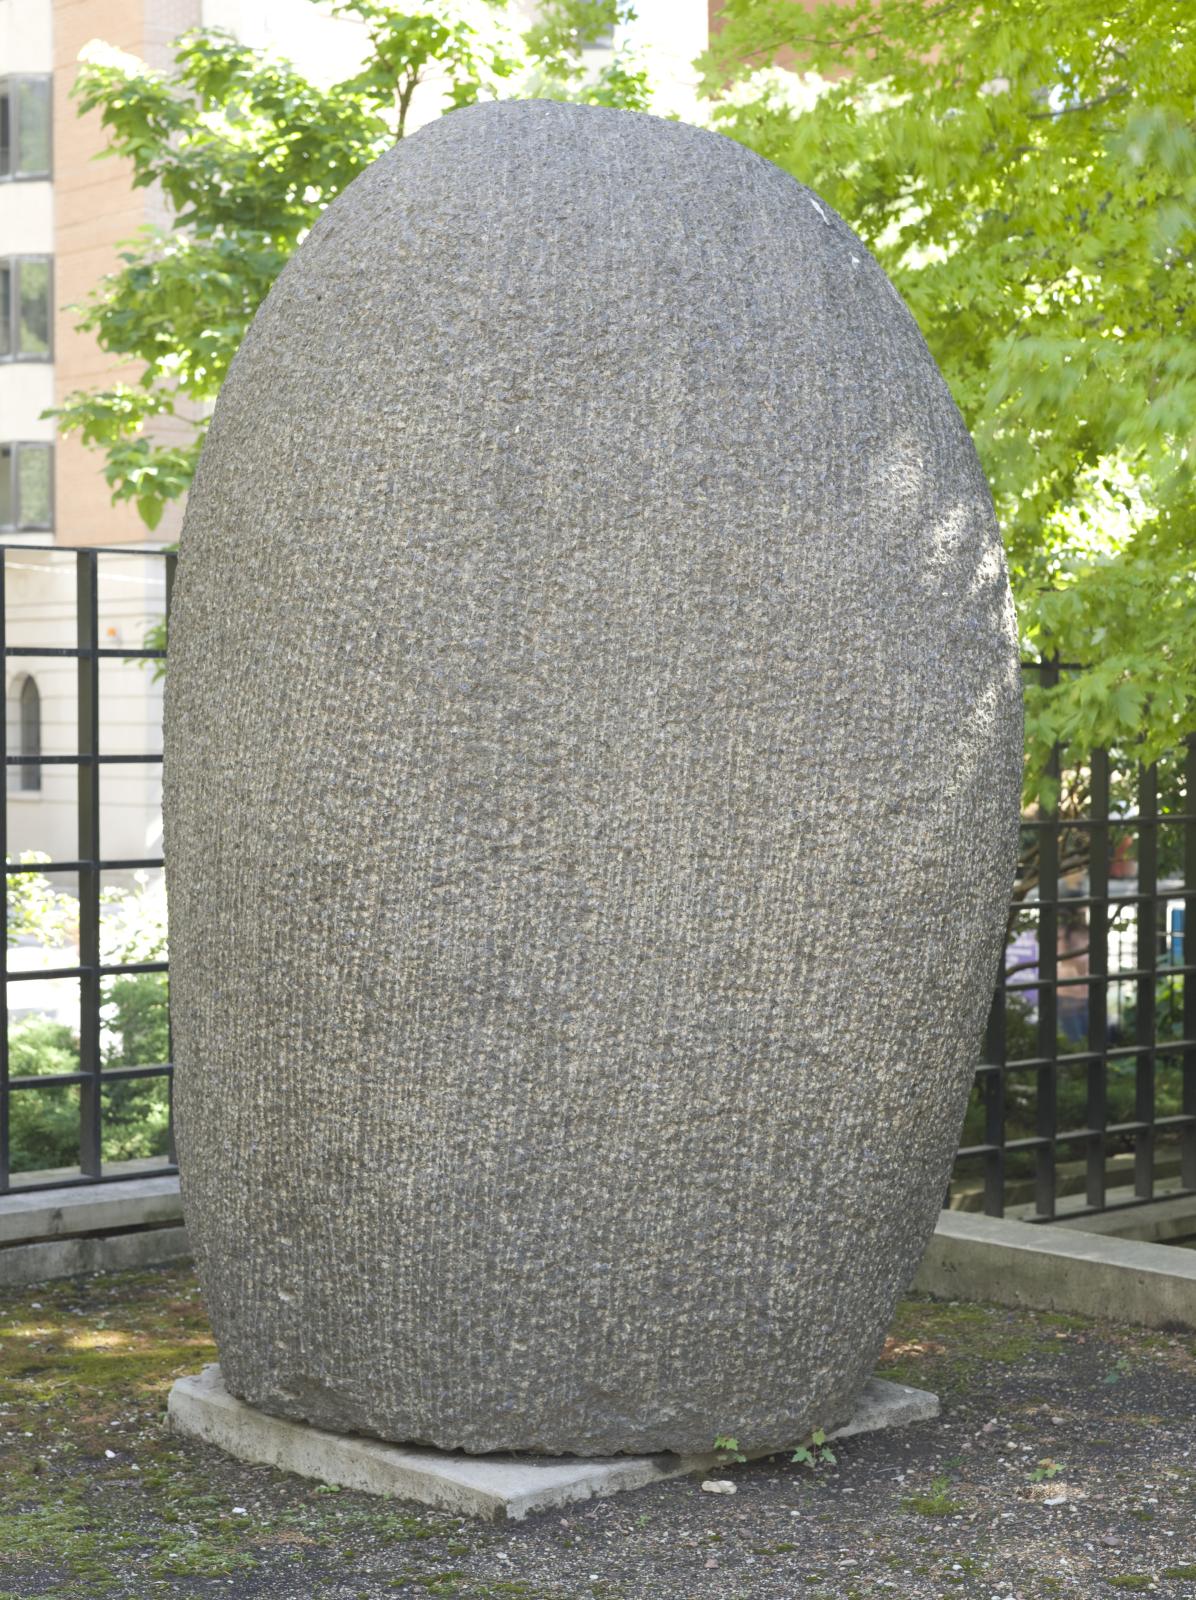 Photograph of a person-sized rounded outdoor sculpture made of grey, textured stone